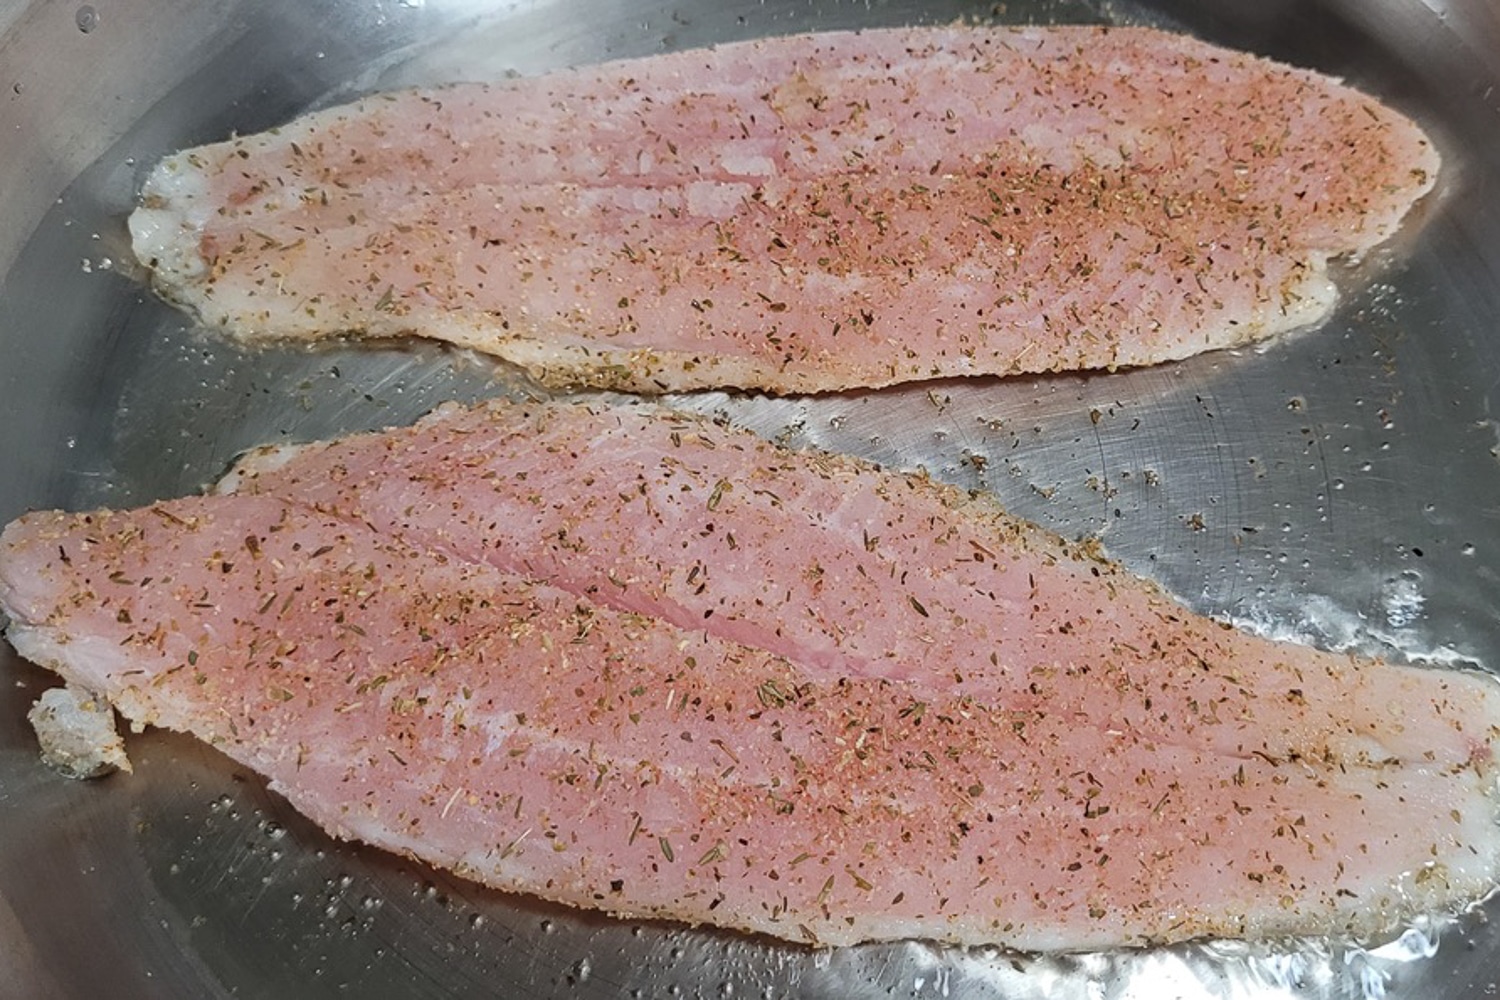 Saba fish fillet coated with italian seasoning on a frying pan.